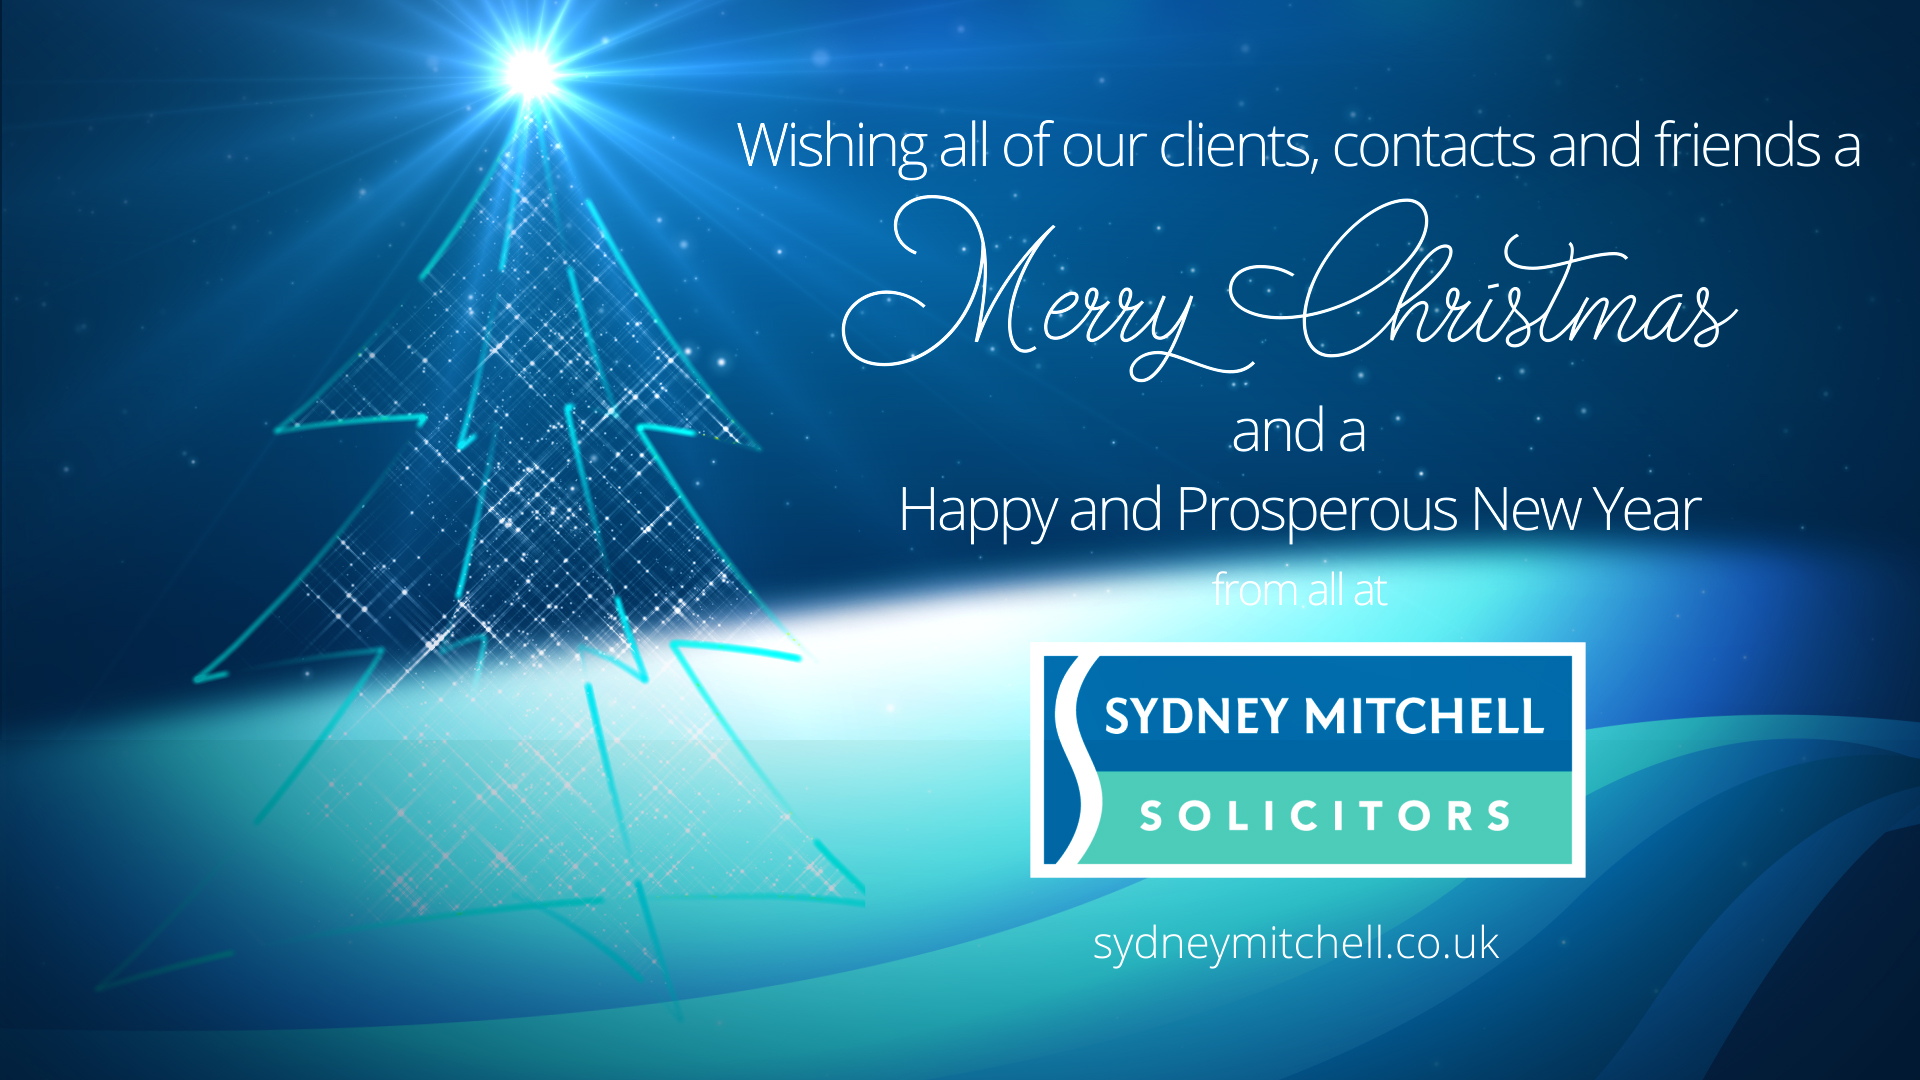 Merry Christmas and Happy New Year from all at Sydney Mitchell LLP